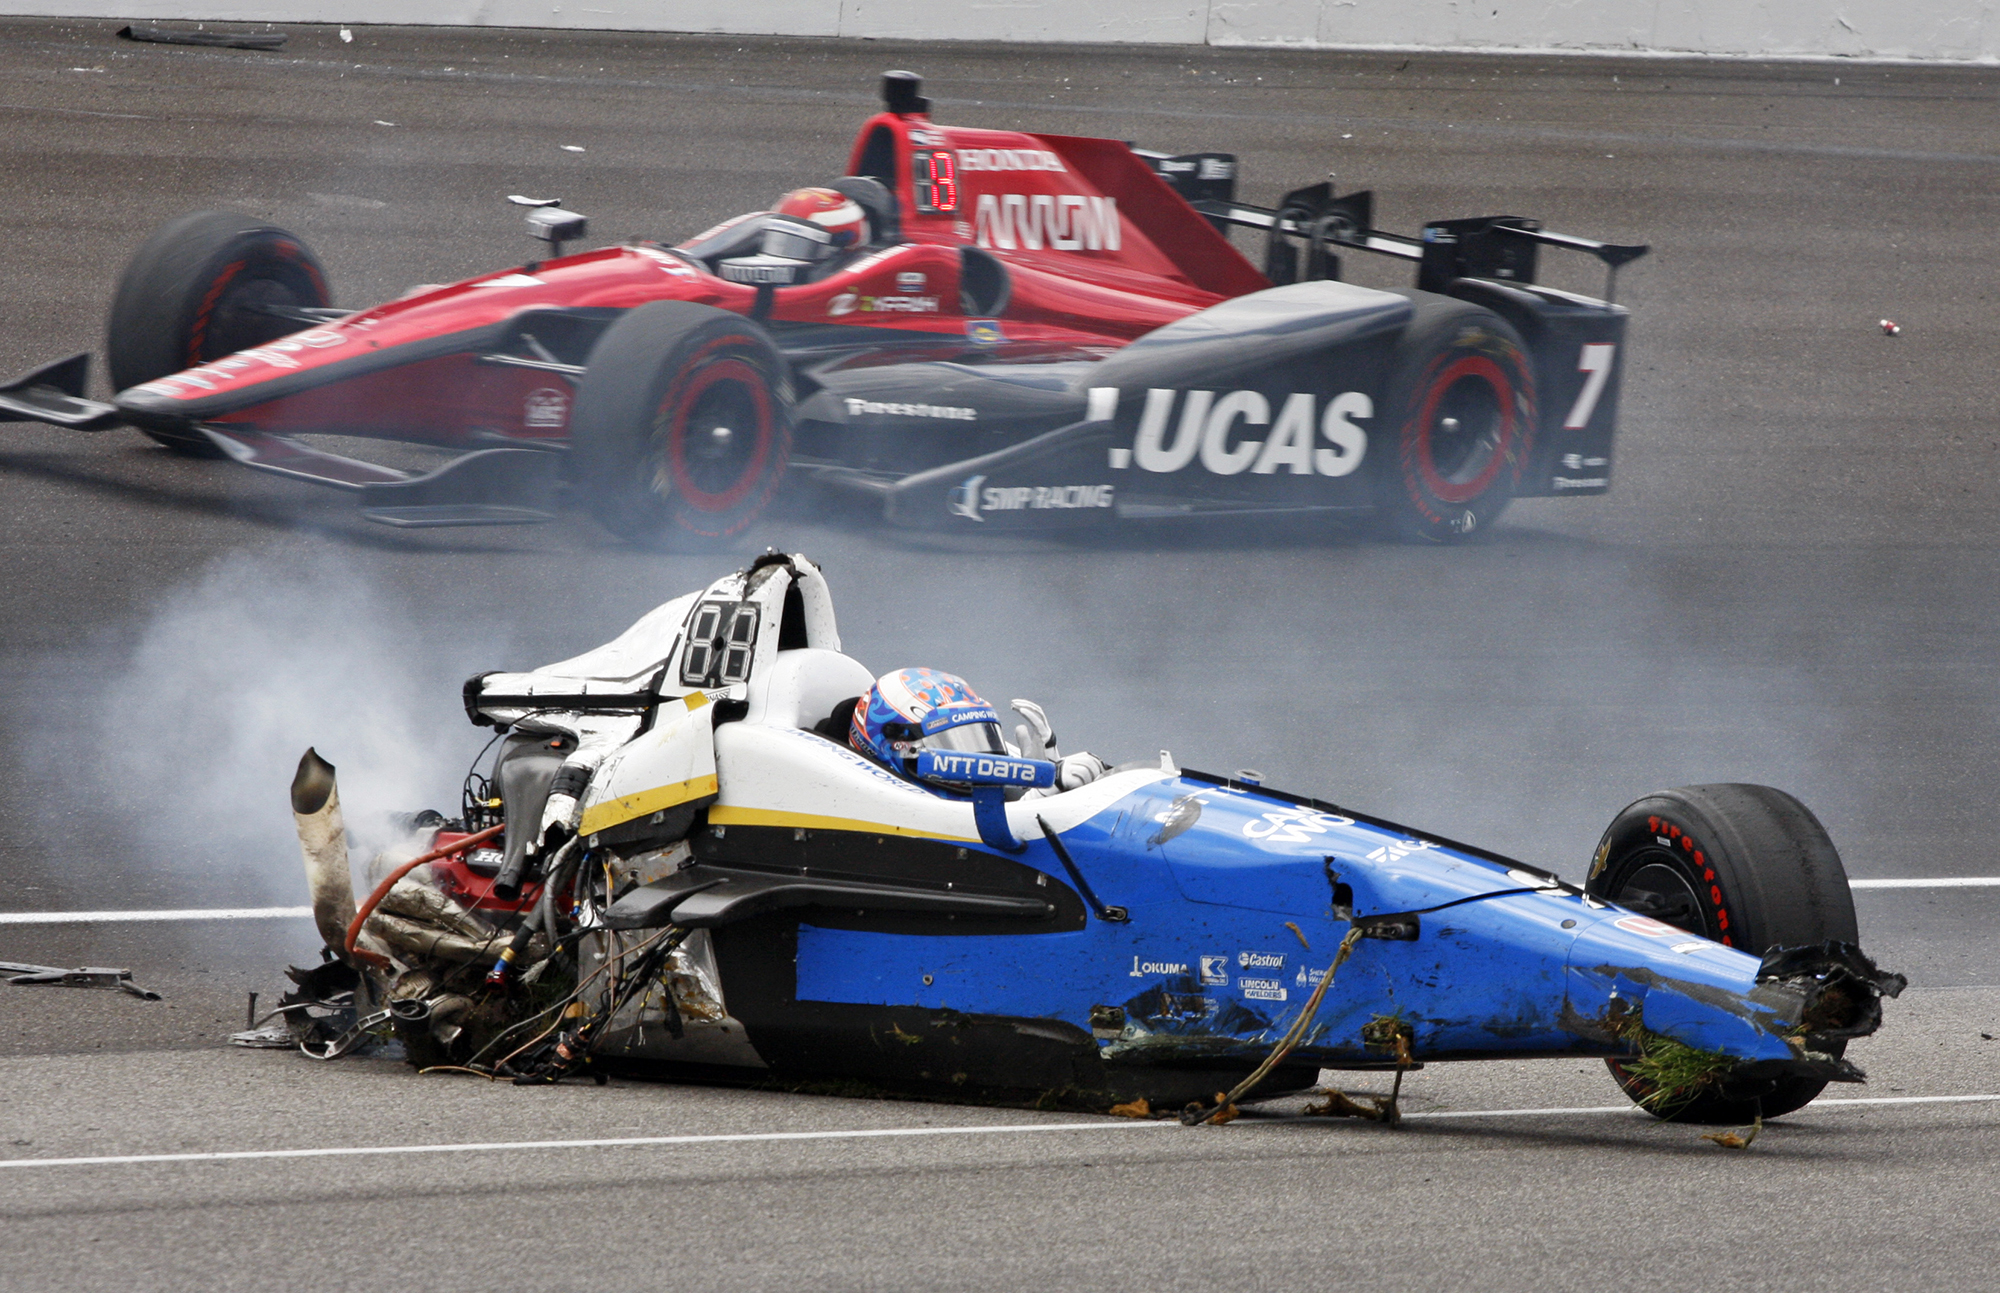 Scott Dixon, of New Zealand, sits in the remains of his car after going airborne in a crash during the running of the Indianapolis 500 auto race at Indianapolis Motor Speedway, on May 28, 2017, in Indianapolis. (Bud Cunningham—AP)